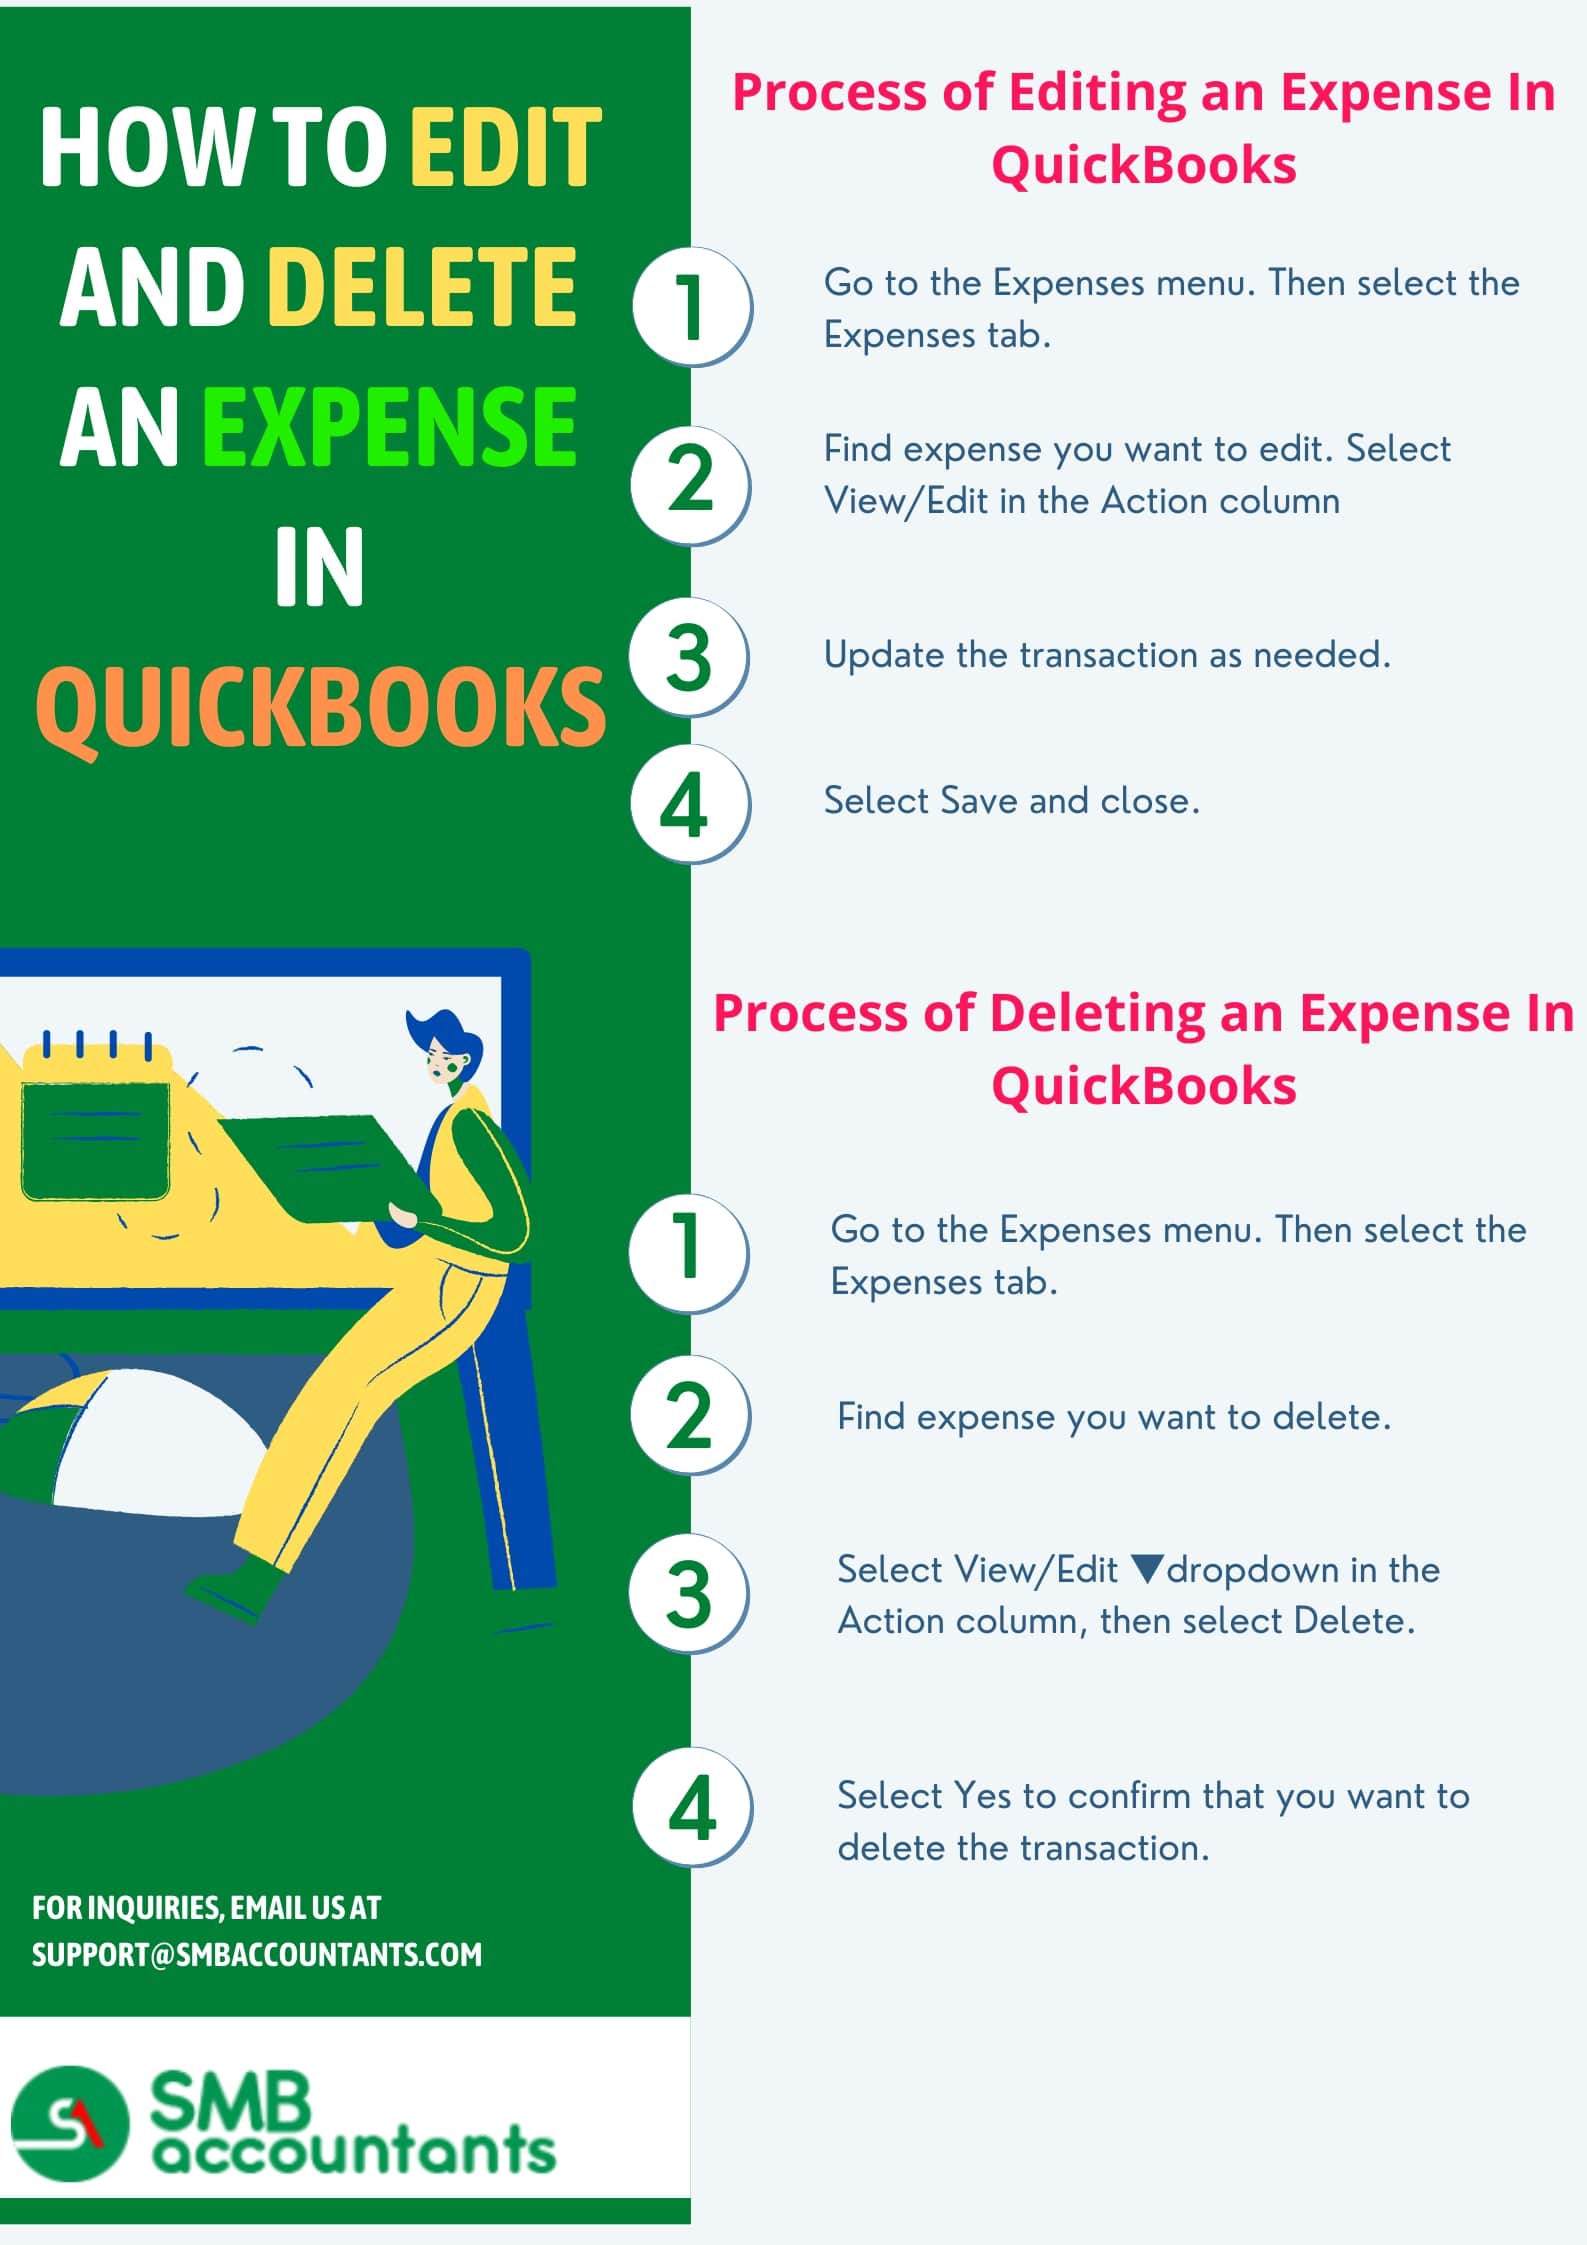 Infographics: How to Edit & Delete an Expense in Quickbooks